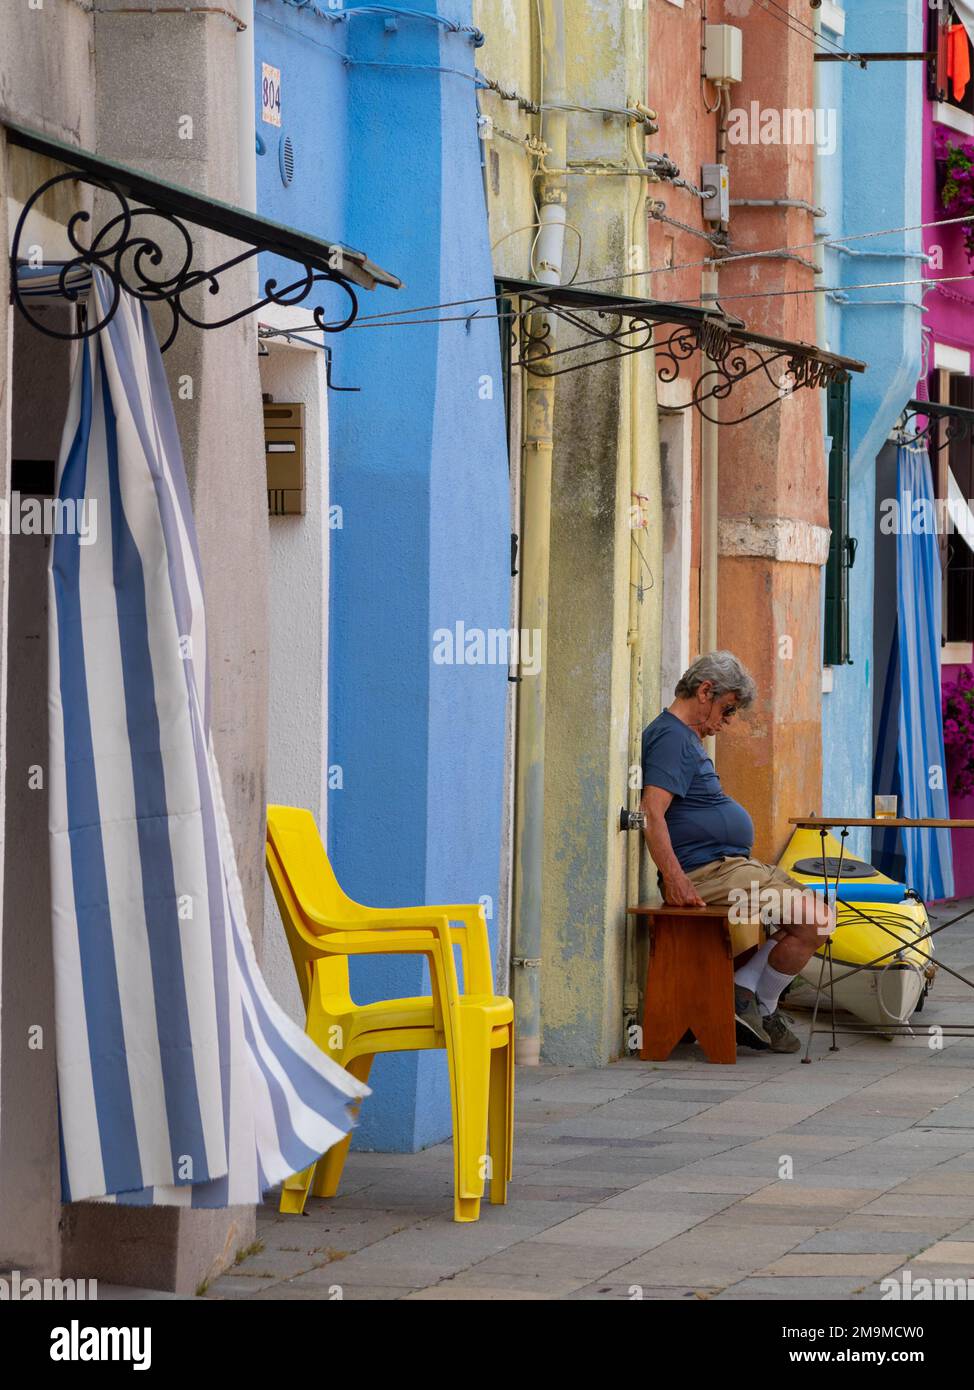 A man sleeps seated outside in a colorful street of Burano Stock Photo